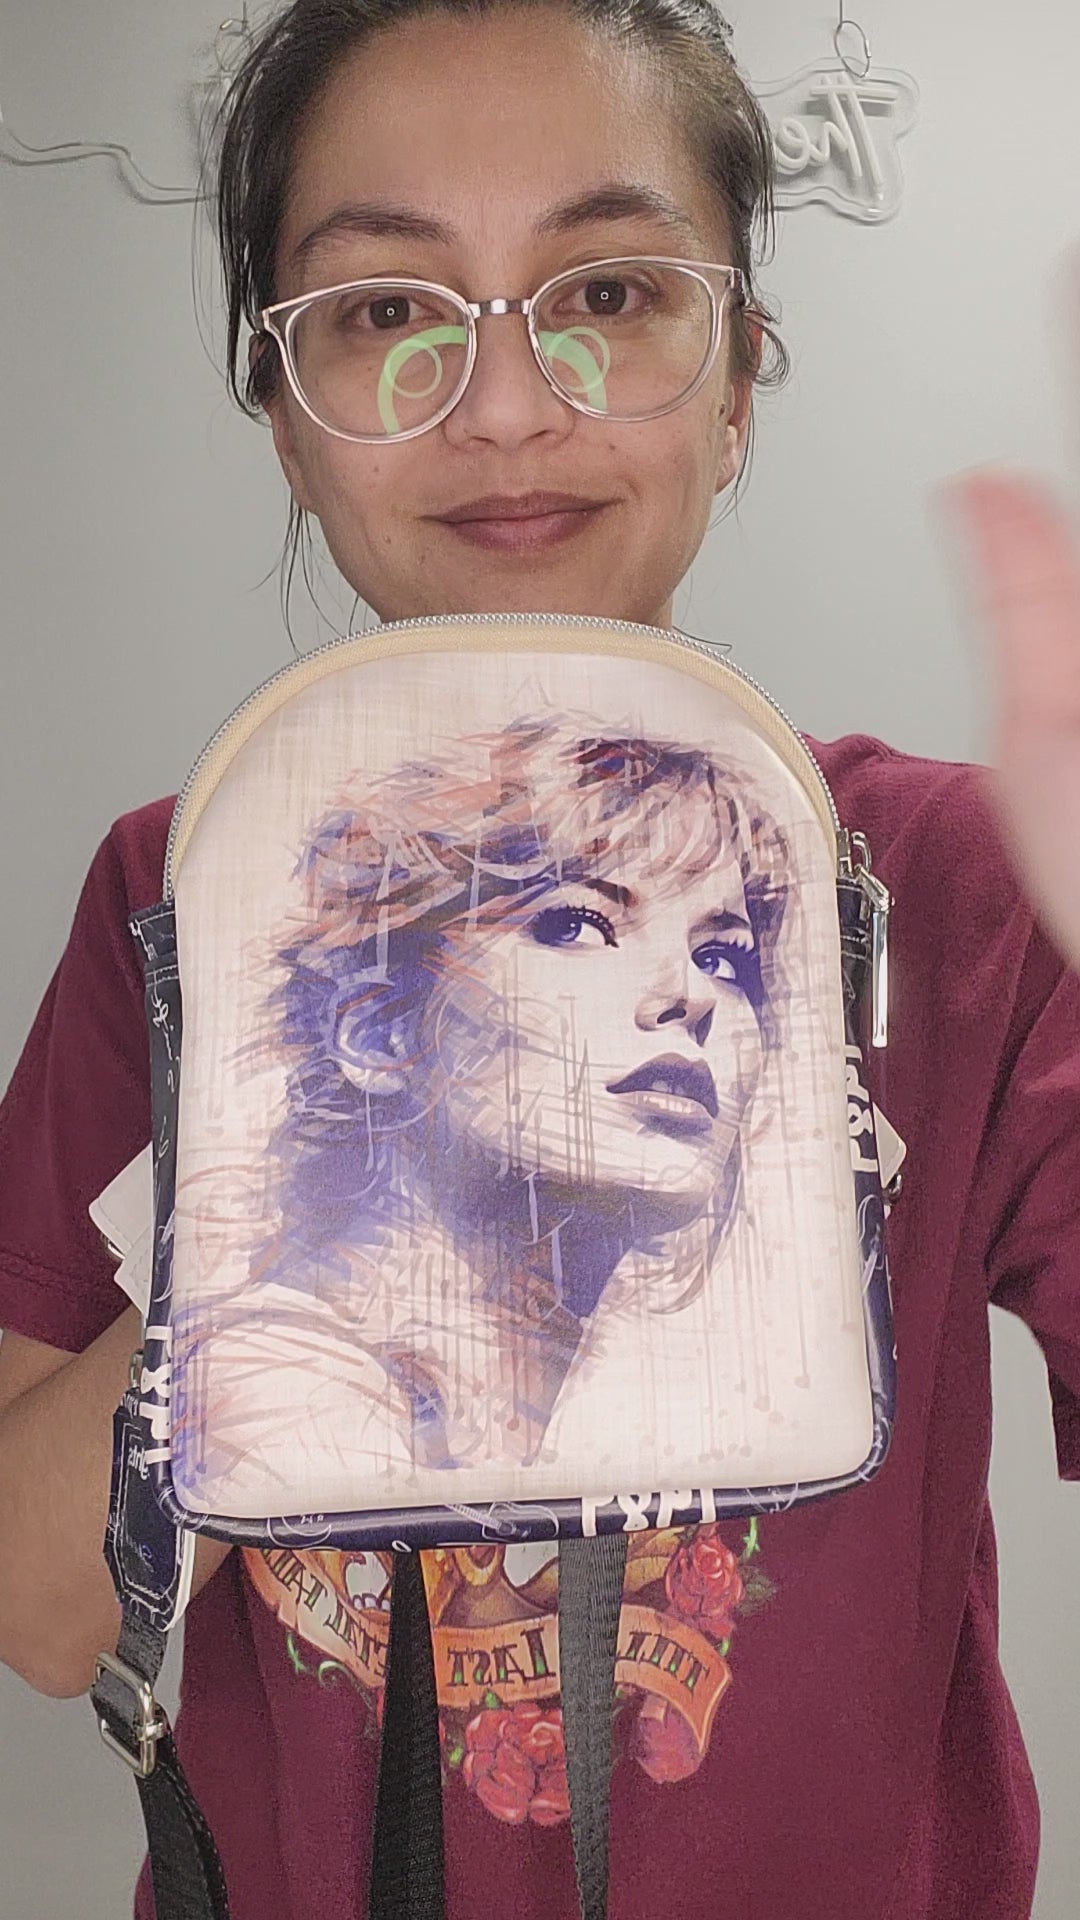 Video of the Swiftie Sling Bag. 